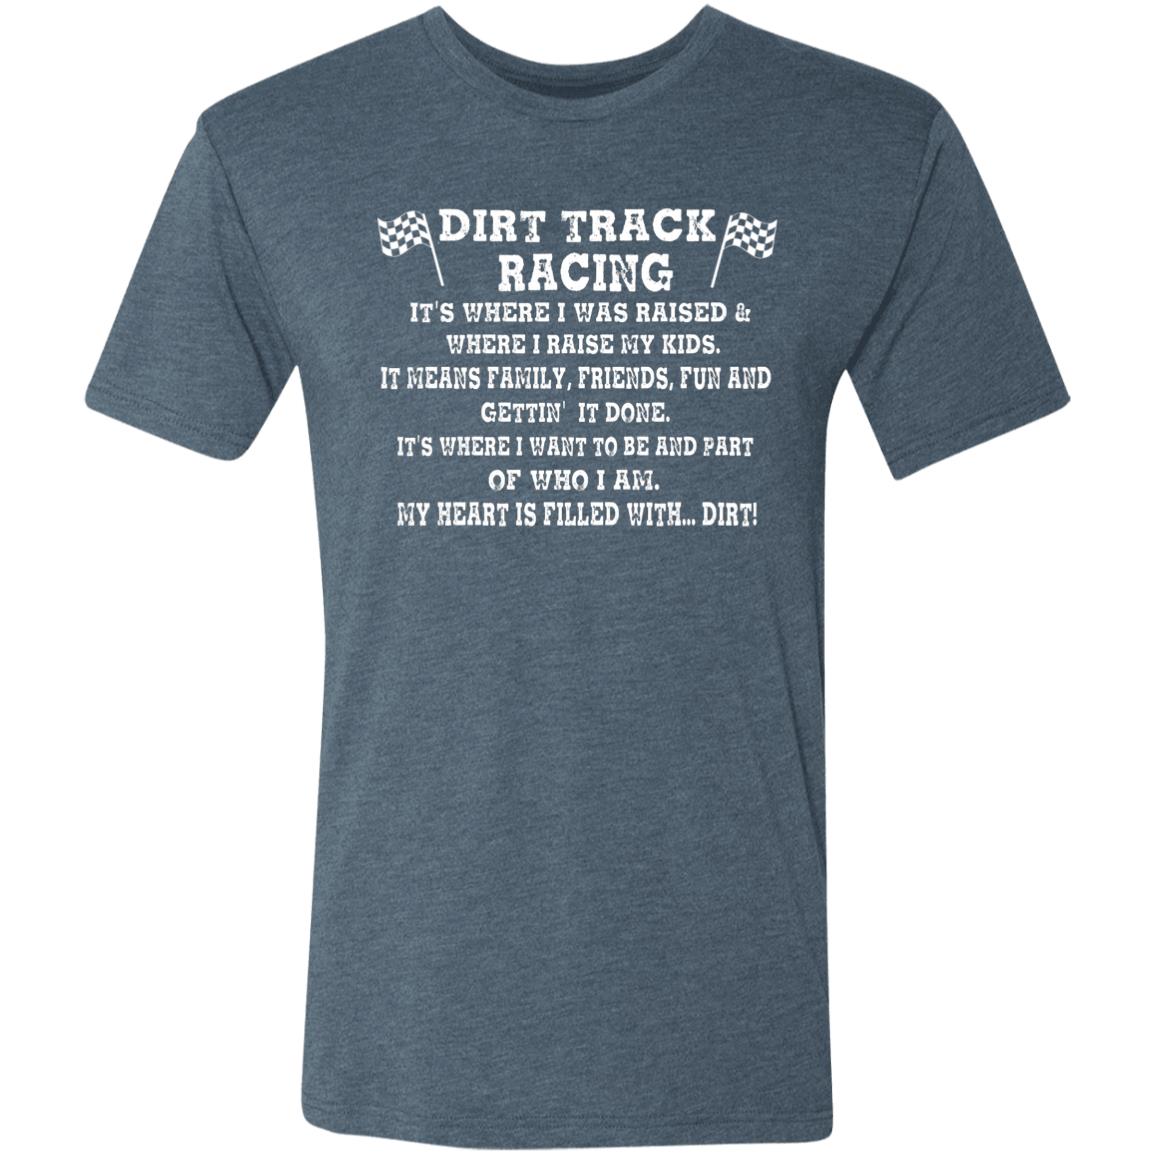 Dirt Track Racing It's Where I Was Raised Men's Triblend T-Shirt